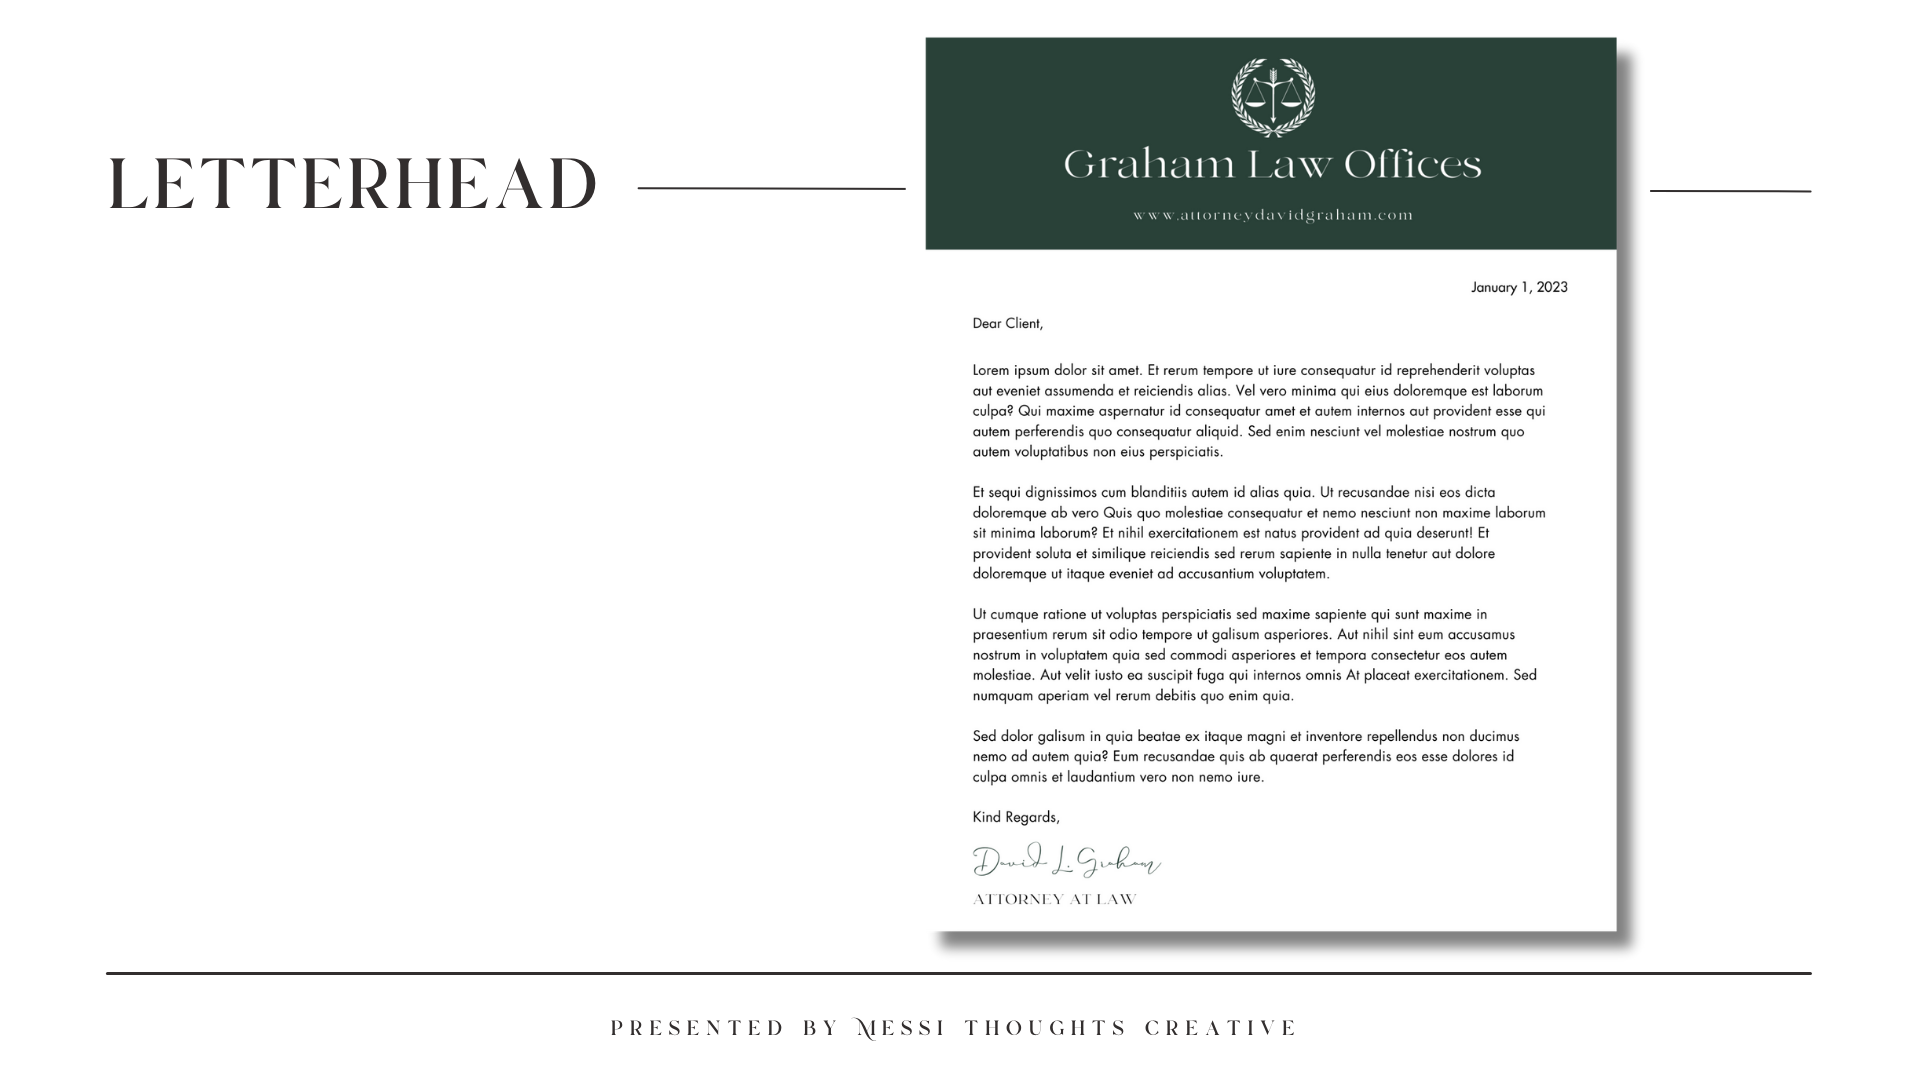 Graham Law Offices Brand Style Guide.png